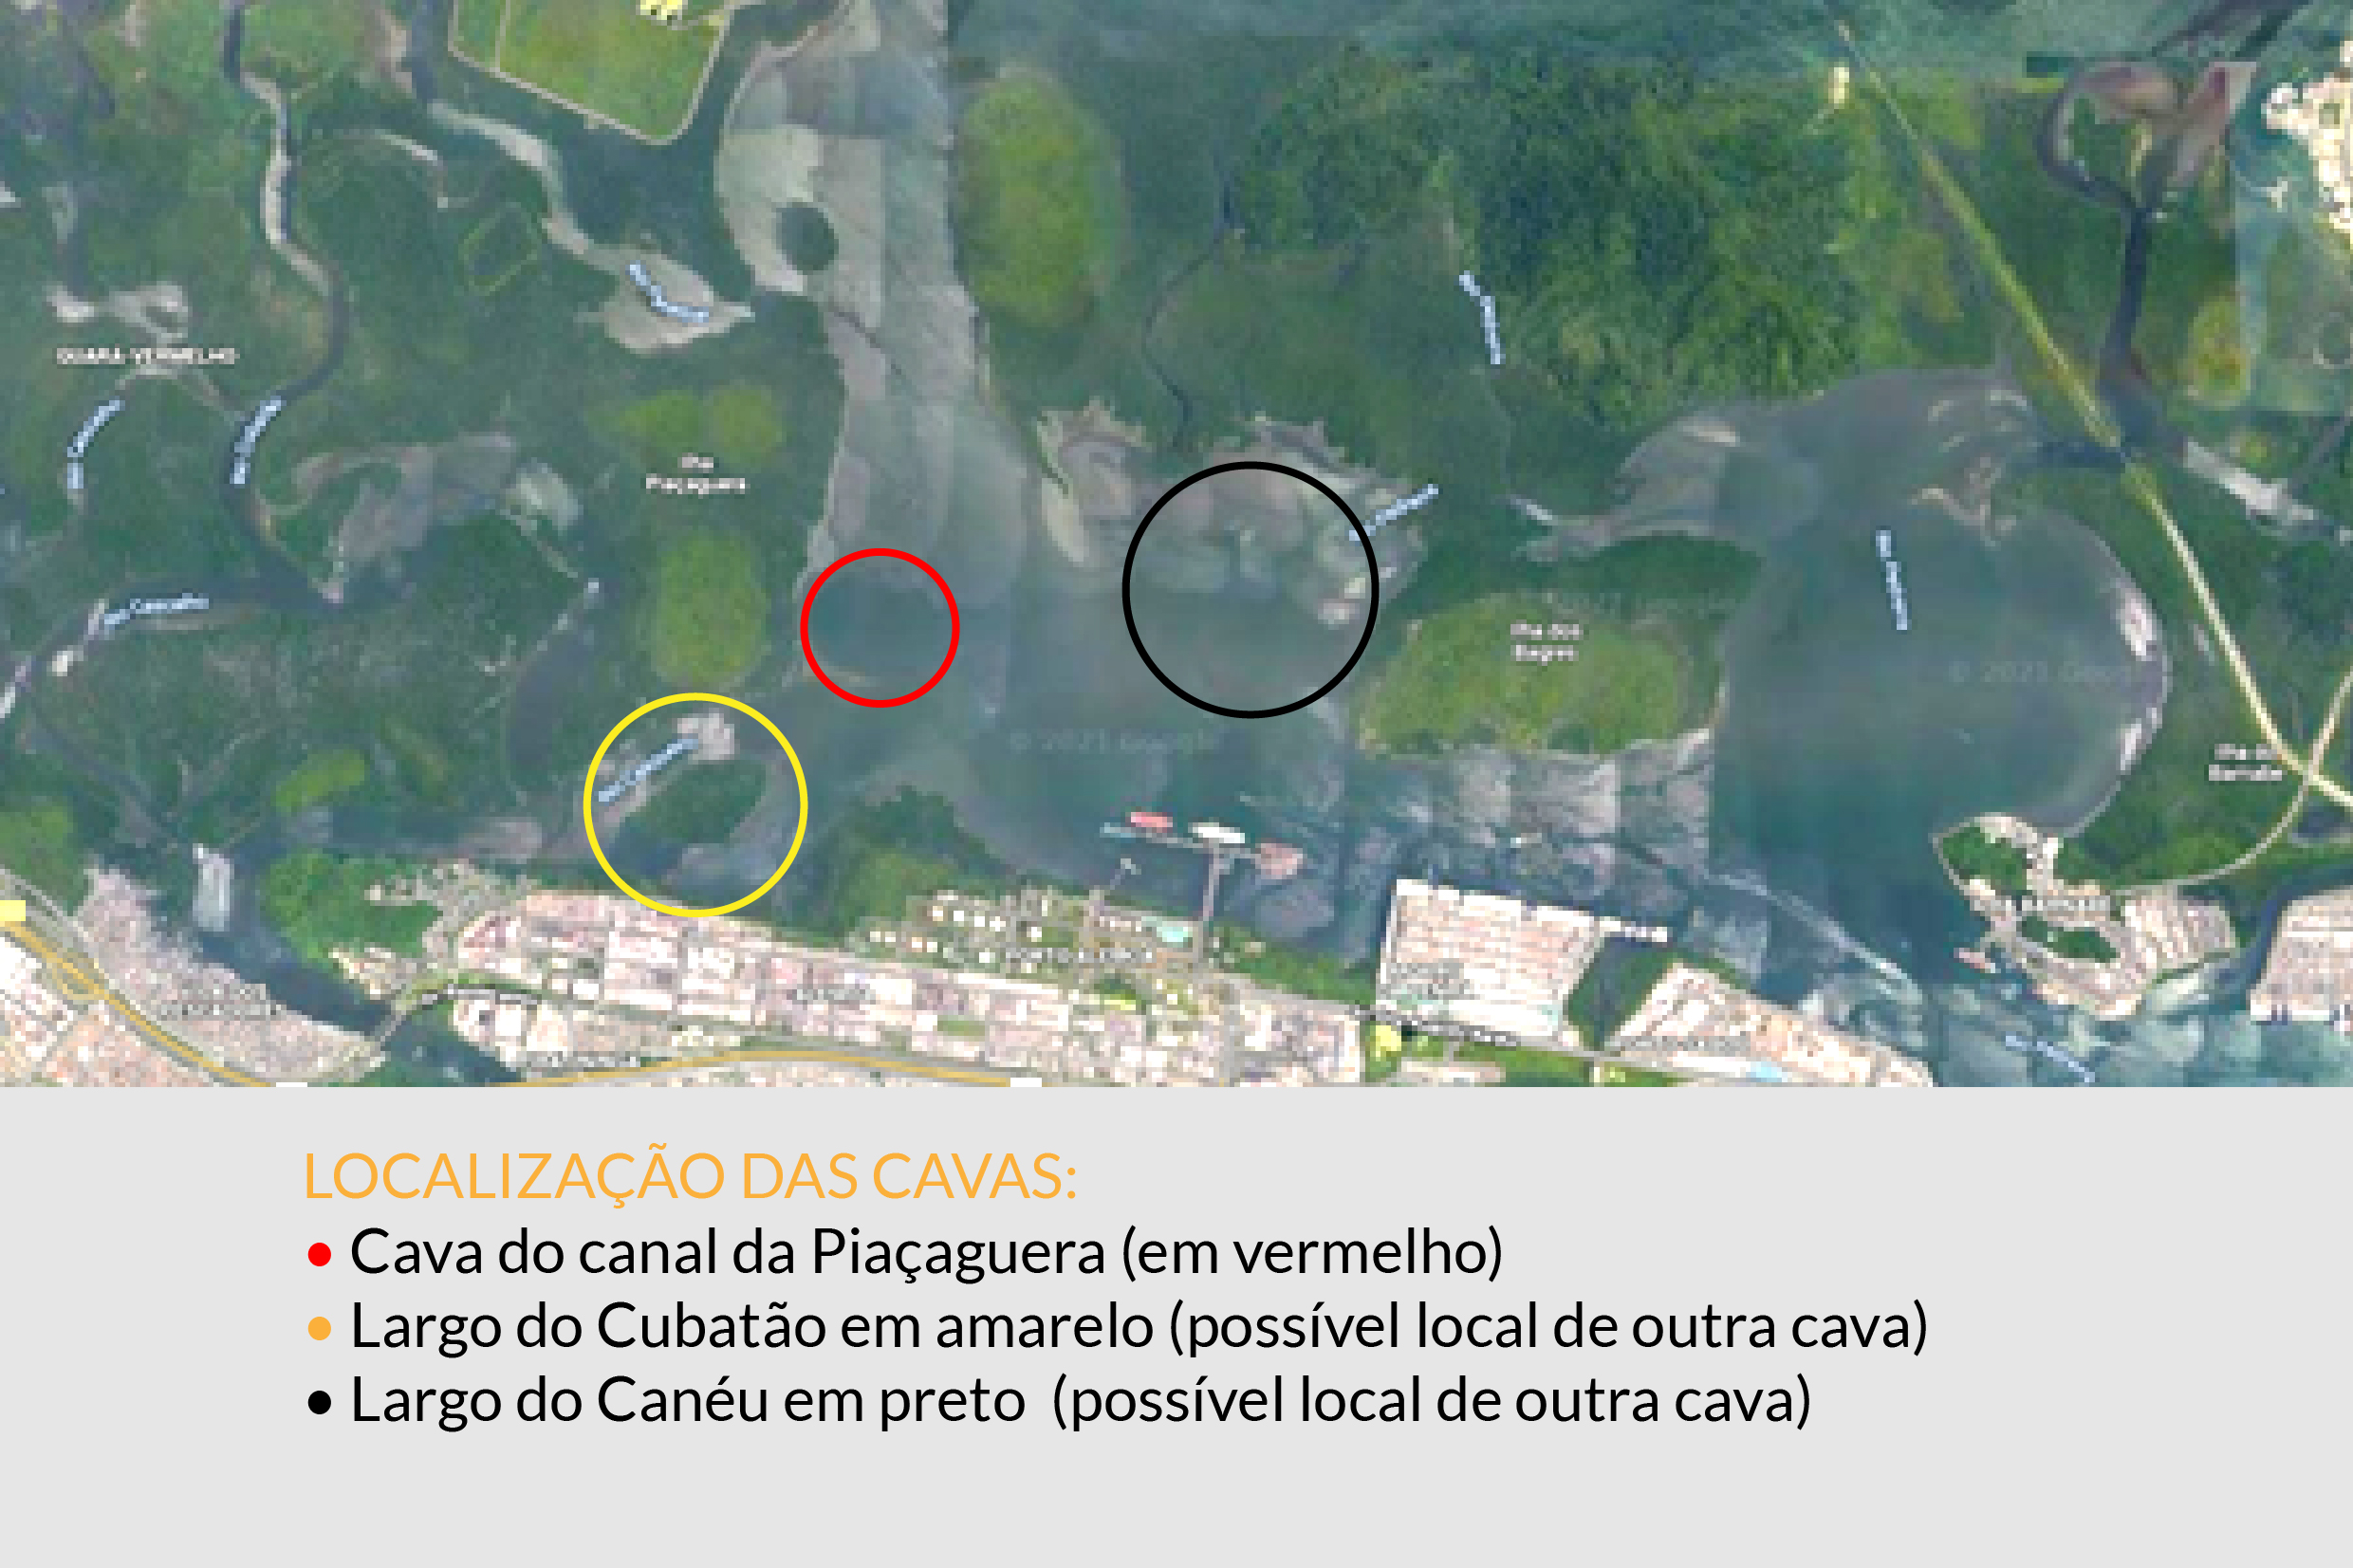 Infogrfico<a style='float:right' href='https://www3.al.sp.gov.br/repositorio/noticia/N-10-2021/fg277250.jpg' target=_blank><img src='/_img/material-file-download-white.png' width='14px' alt='Clique para baixar a imagem'></a>